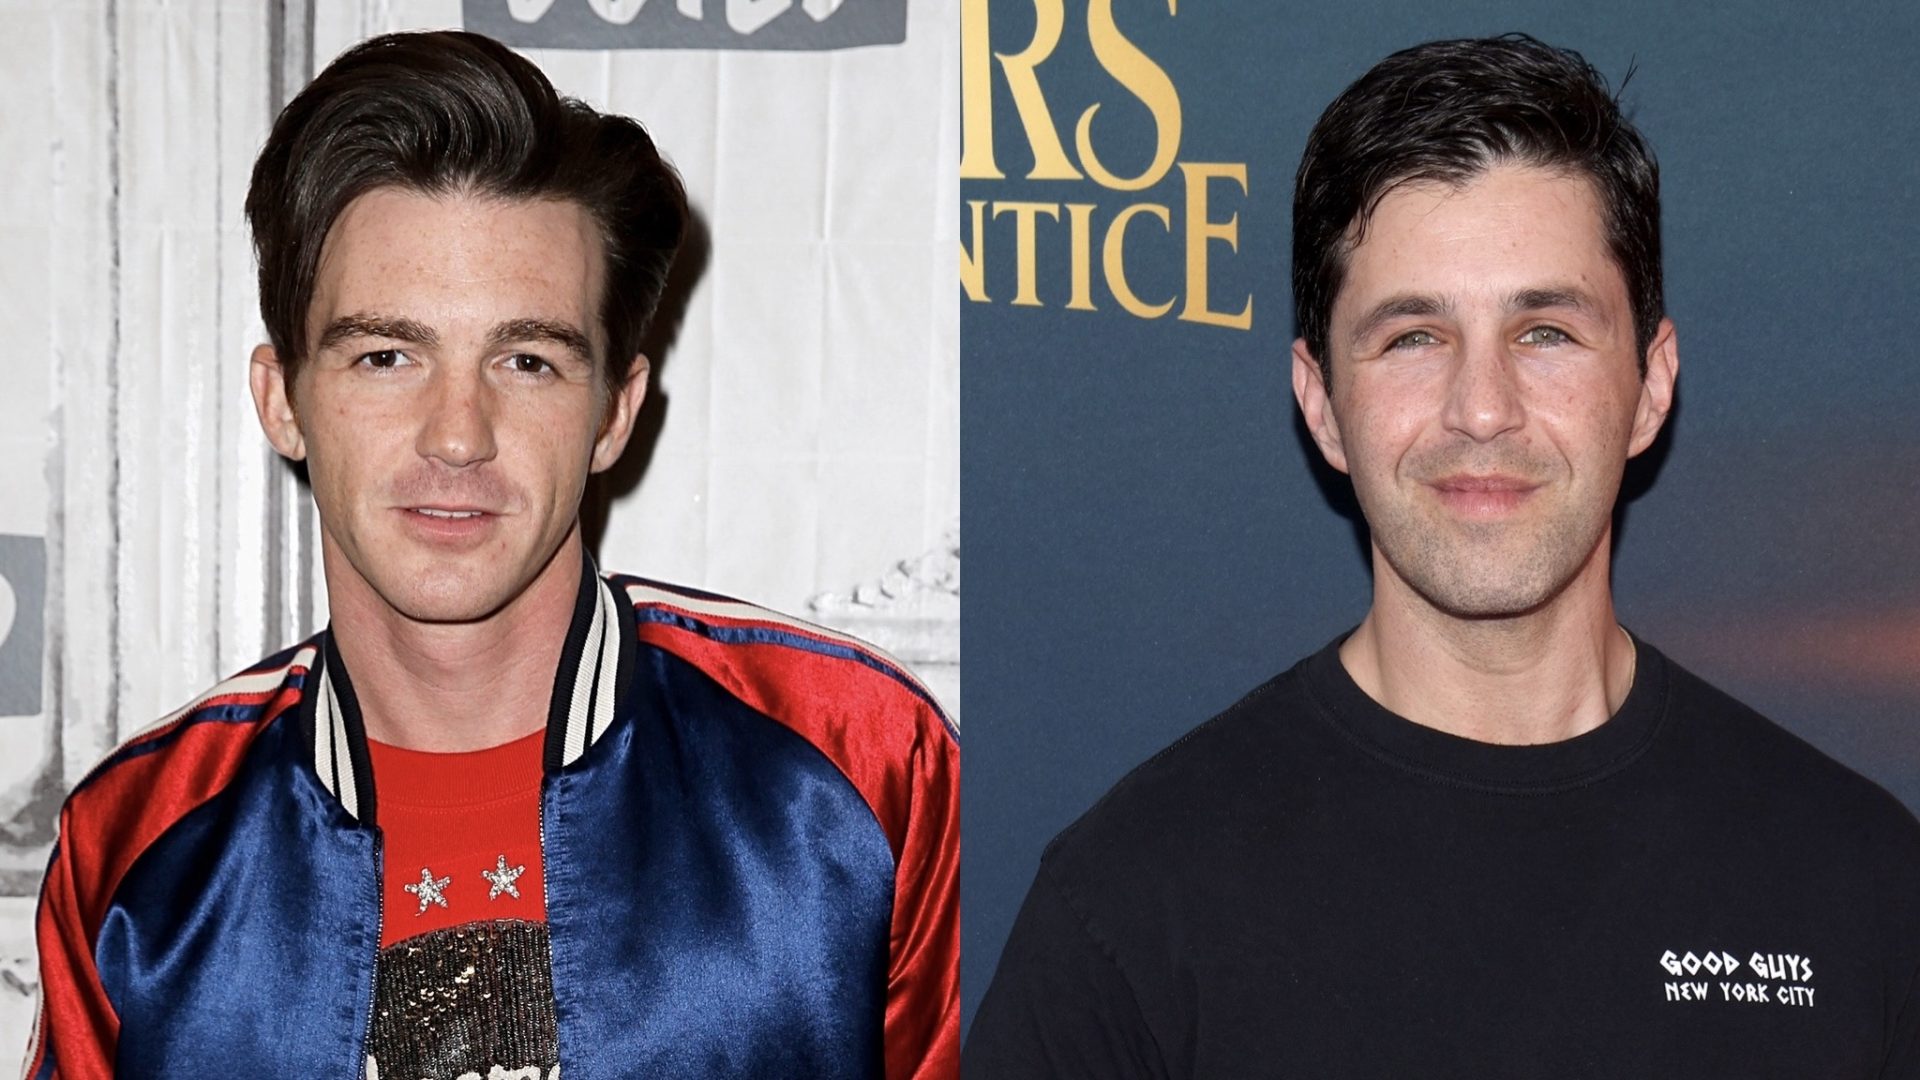 Drake Bell Speaks Out After Josh Peck Received Backlash For Remaining Silent After His Sexual Assault Revelation (WATCH)